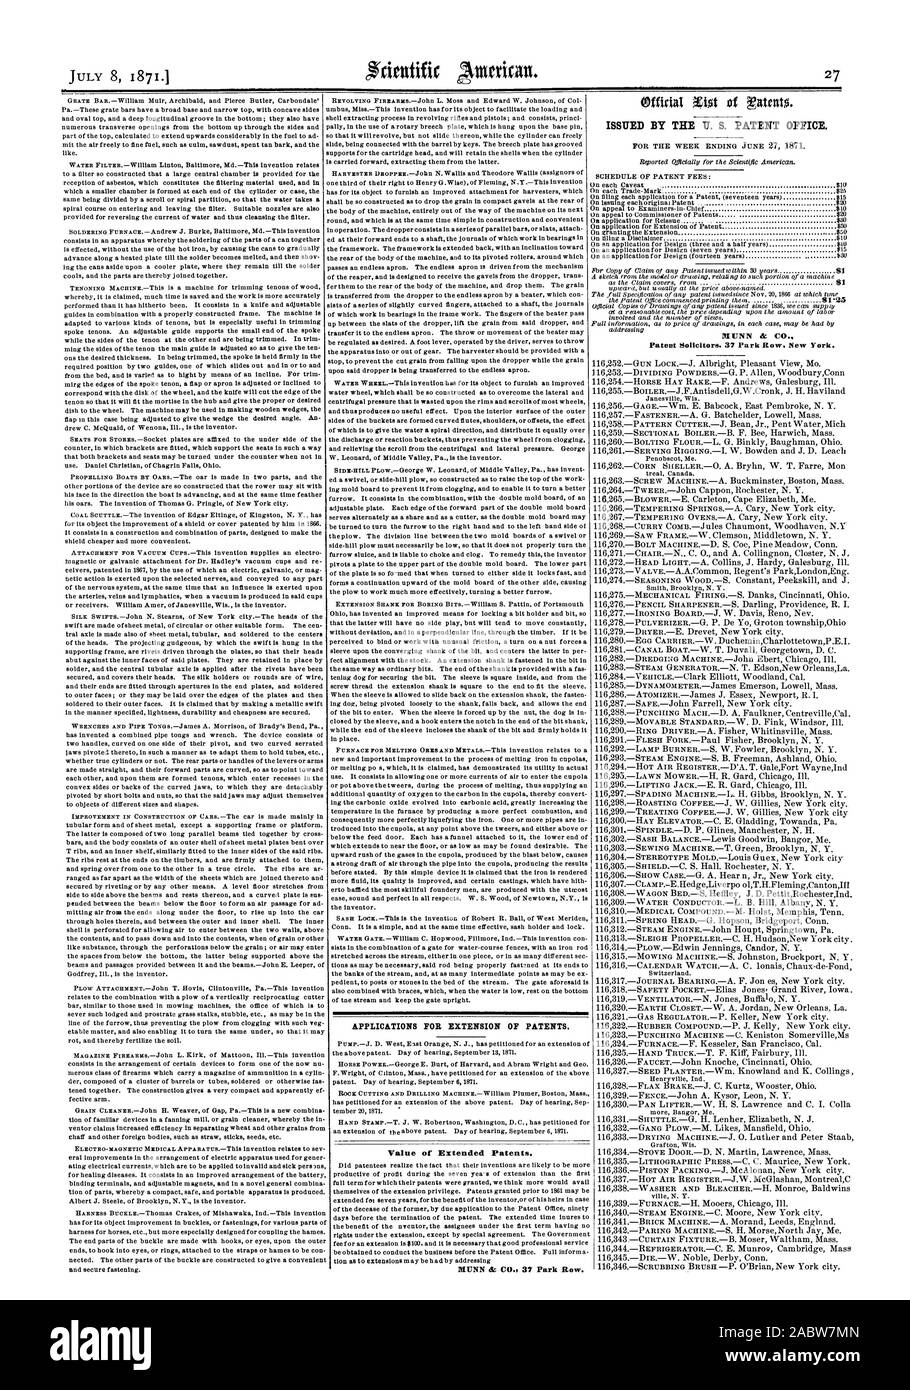 APPLICATIONS FOR EXTENSION OF PATENTS. Value of Extended Patents. MUNN & CO. 37 Park Row. ISSUED BY THE II S. PATENT OFFICE., scientific american, 1871-07-08 Stock Photo